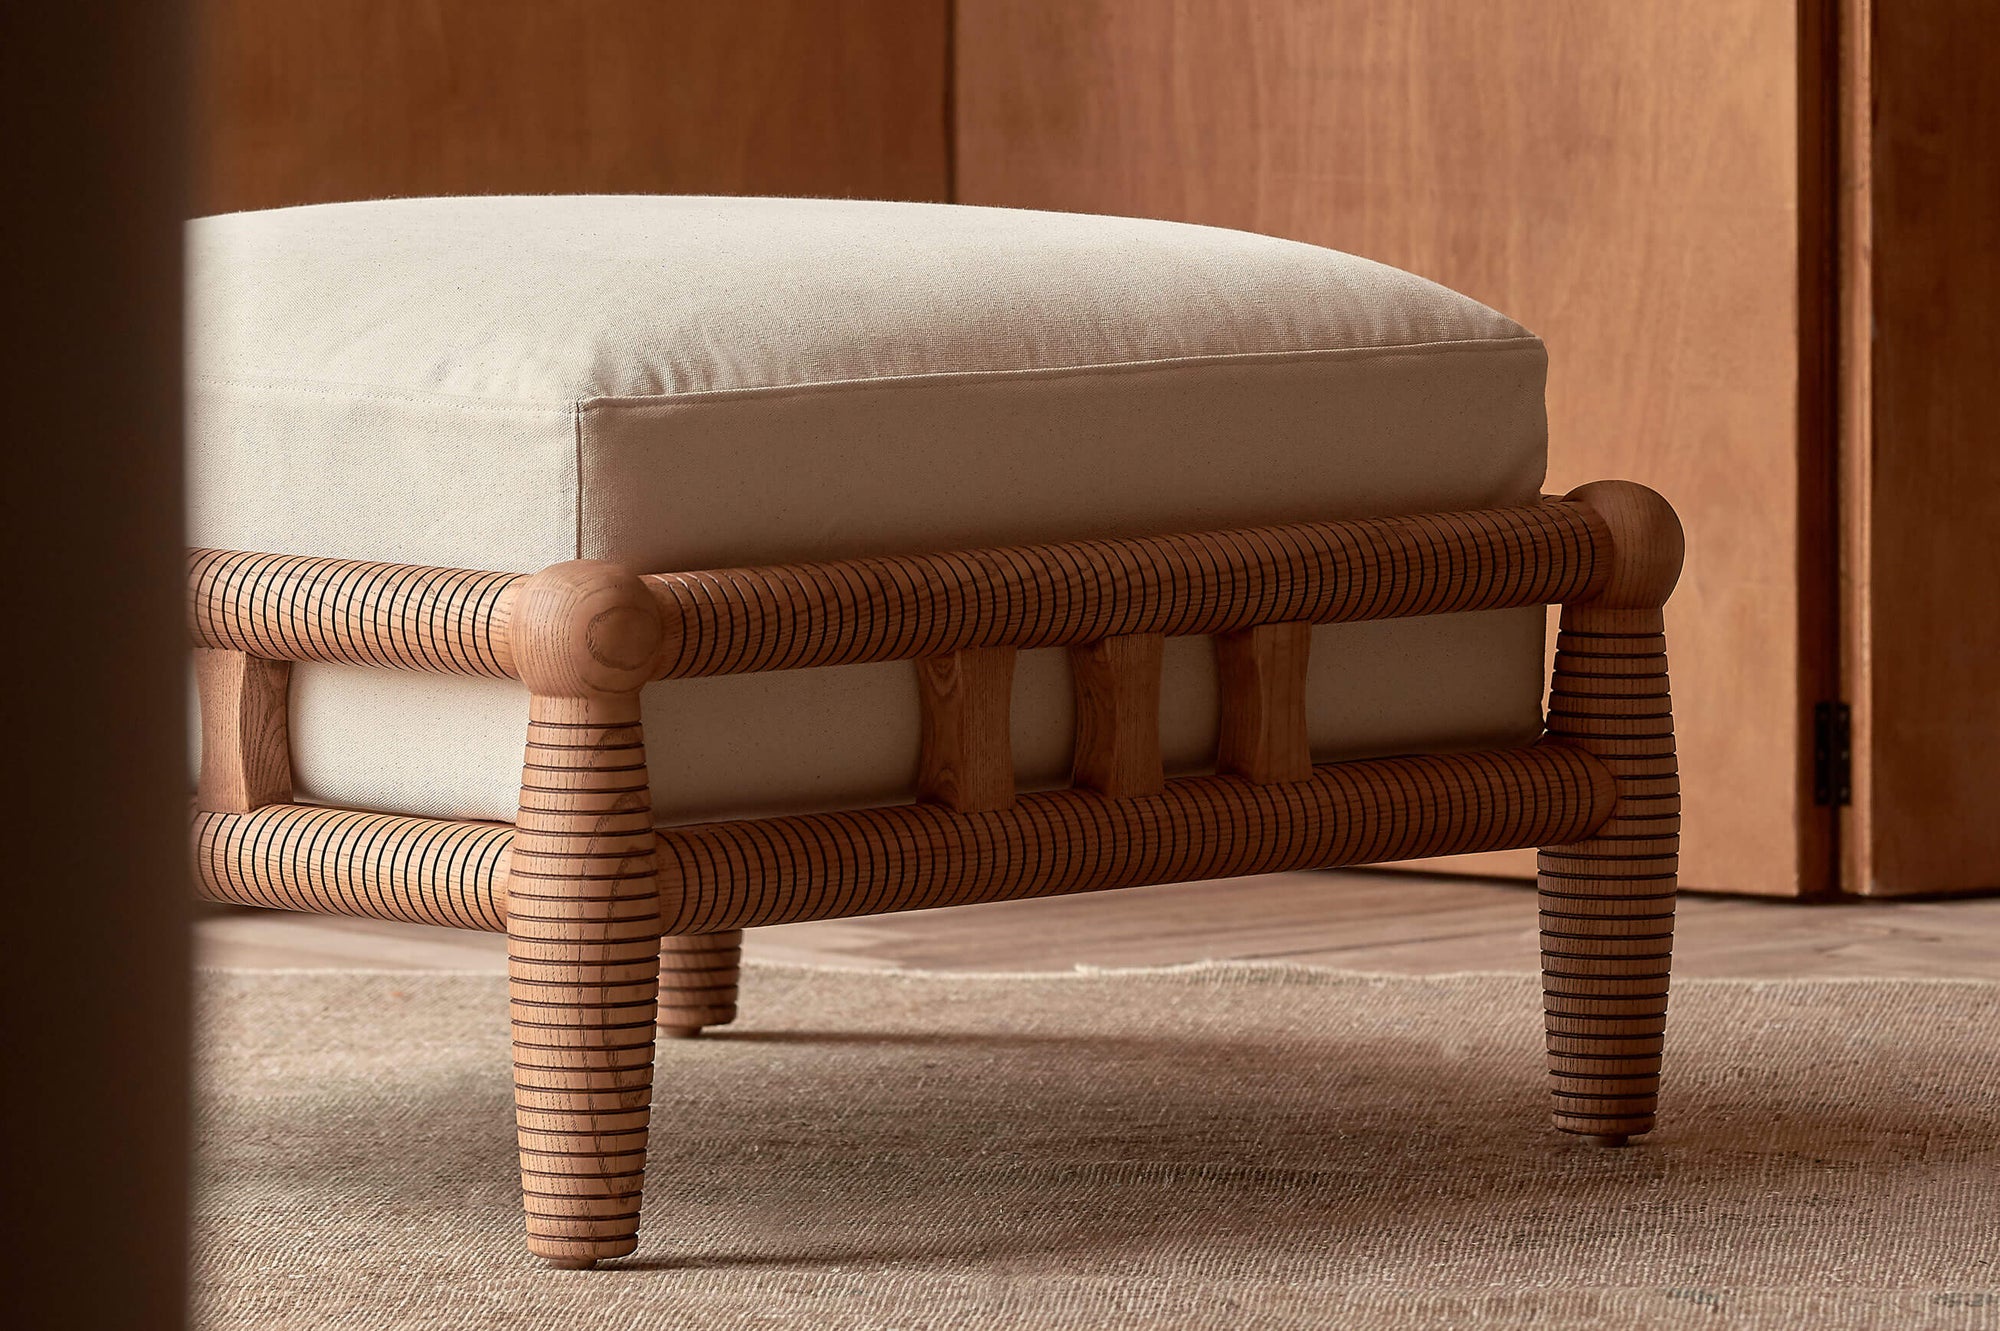 Gio Ottoman in a Heritage Ash wood frame with Cotton Canvas Beach Walk slipcover, placed on top of a rug